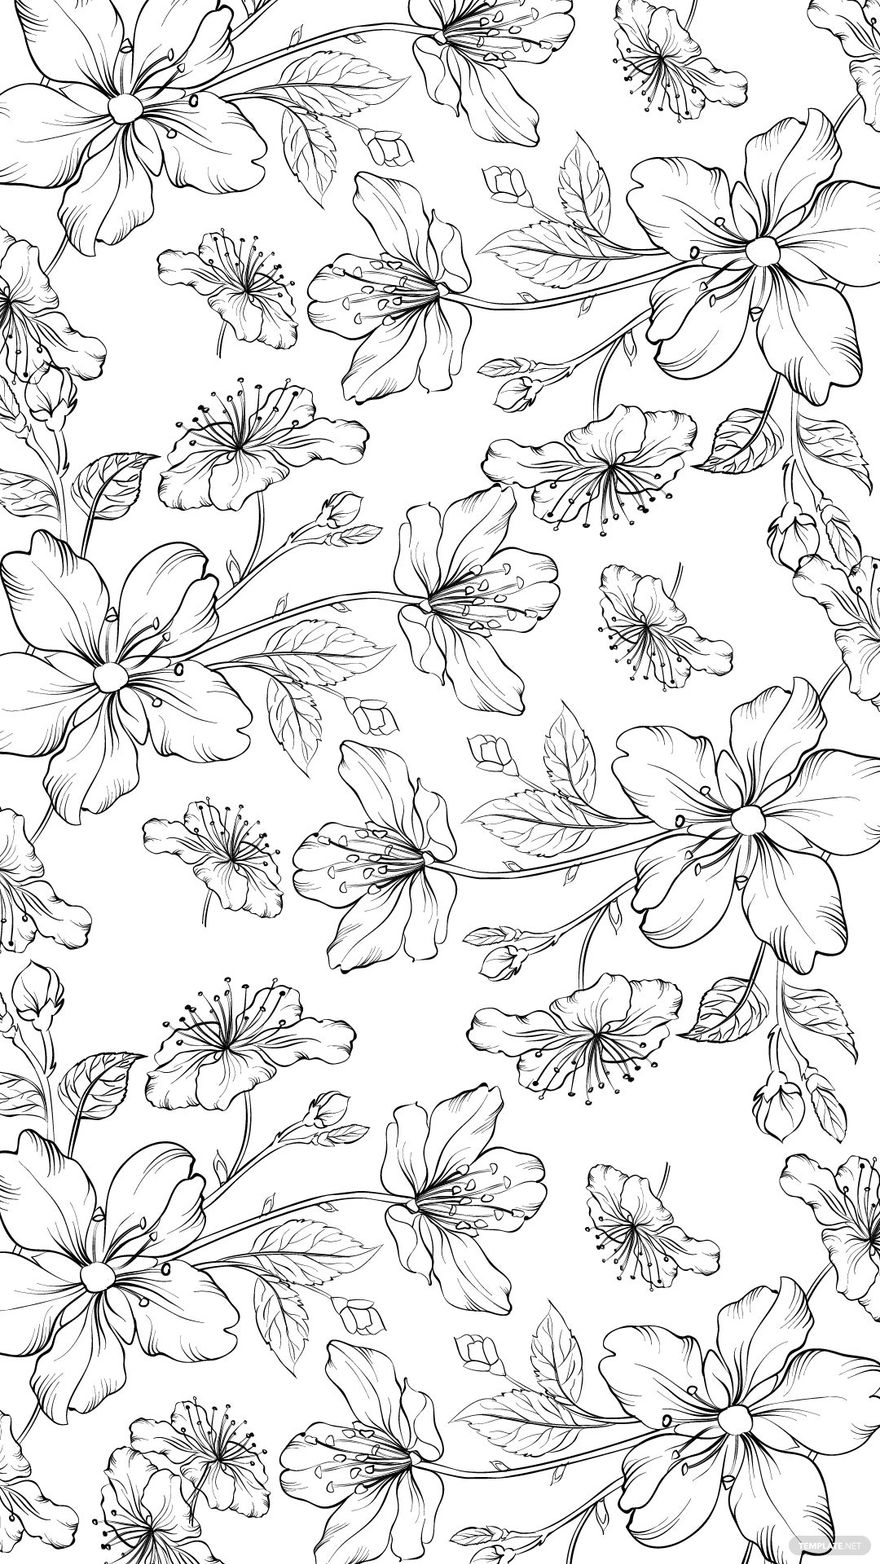 Free Seamless Black Floral Background